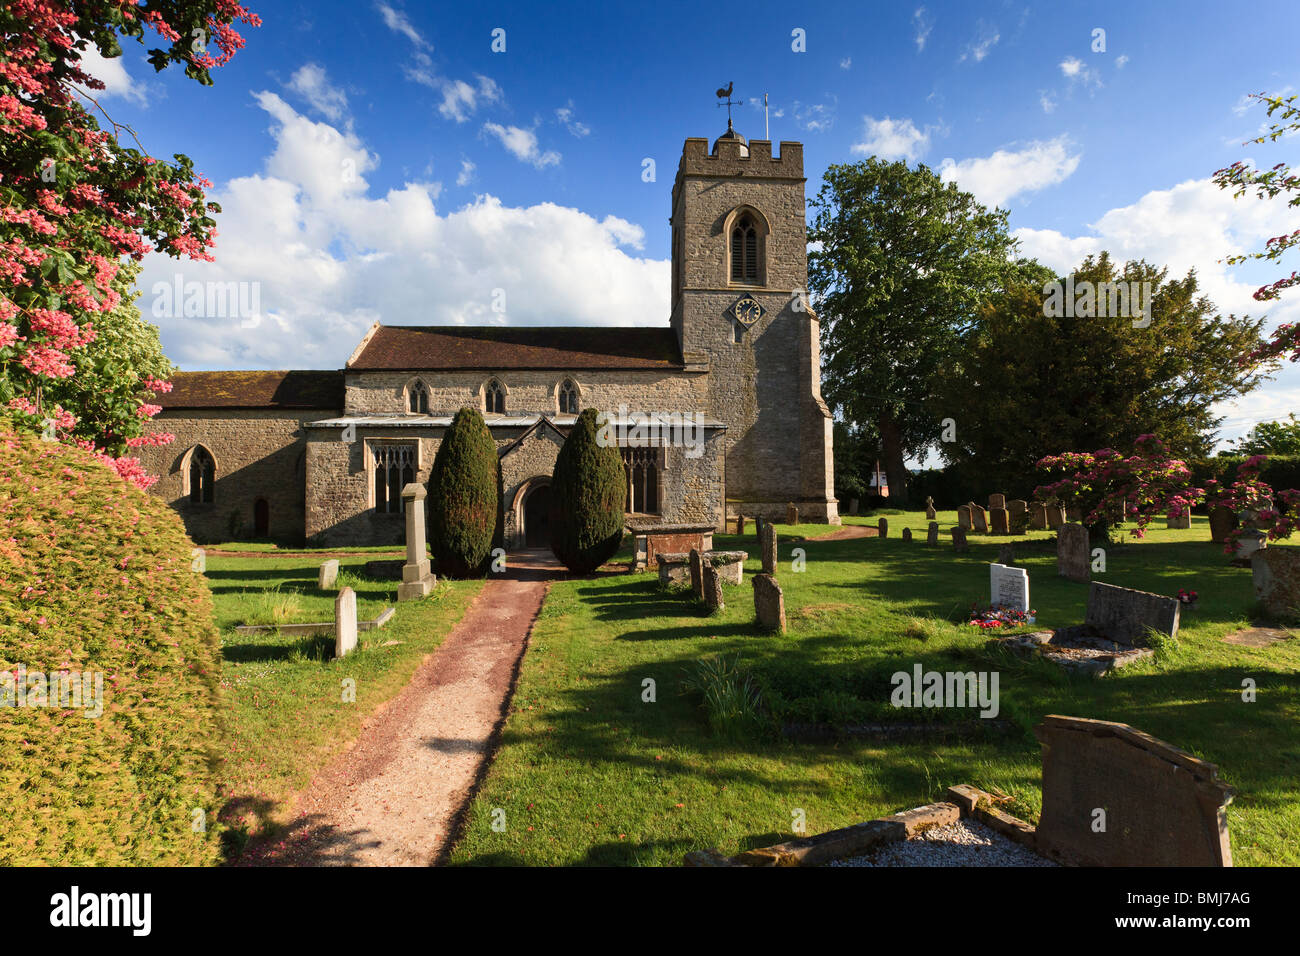 The attractive church of St Laurence, in the desirable village of Weston Underwood, Buckinghamshire, UK Stock Photo